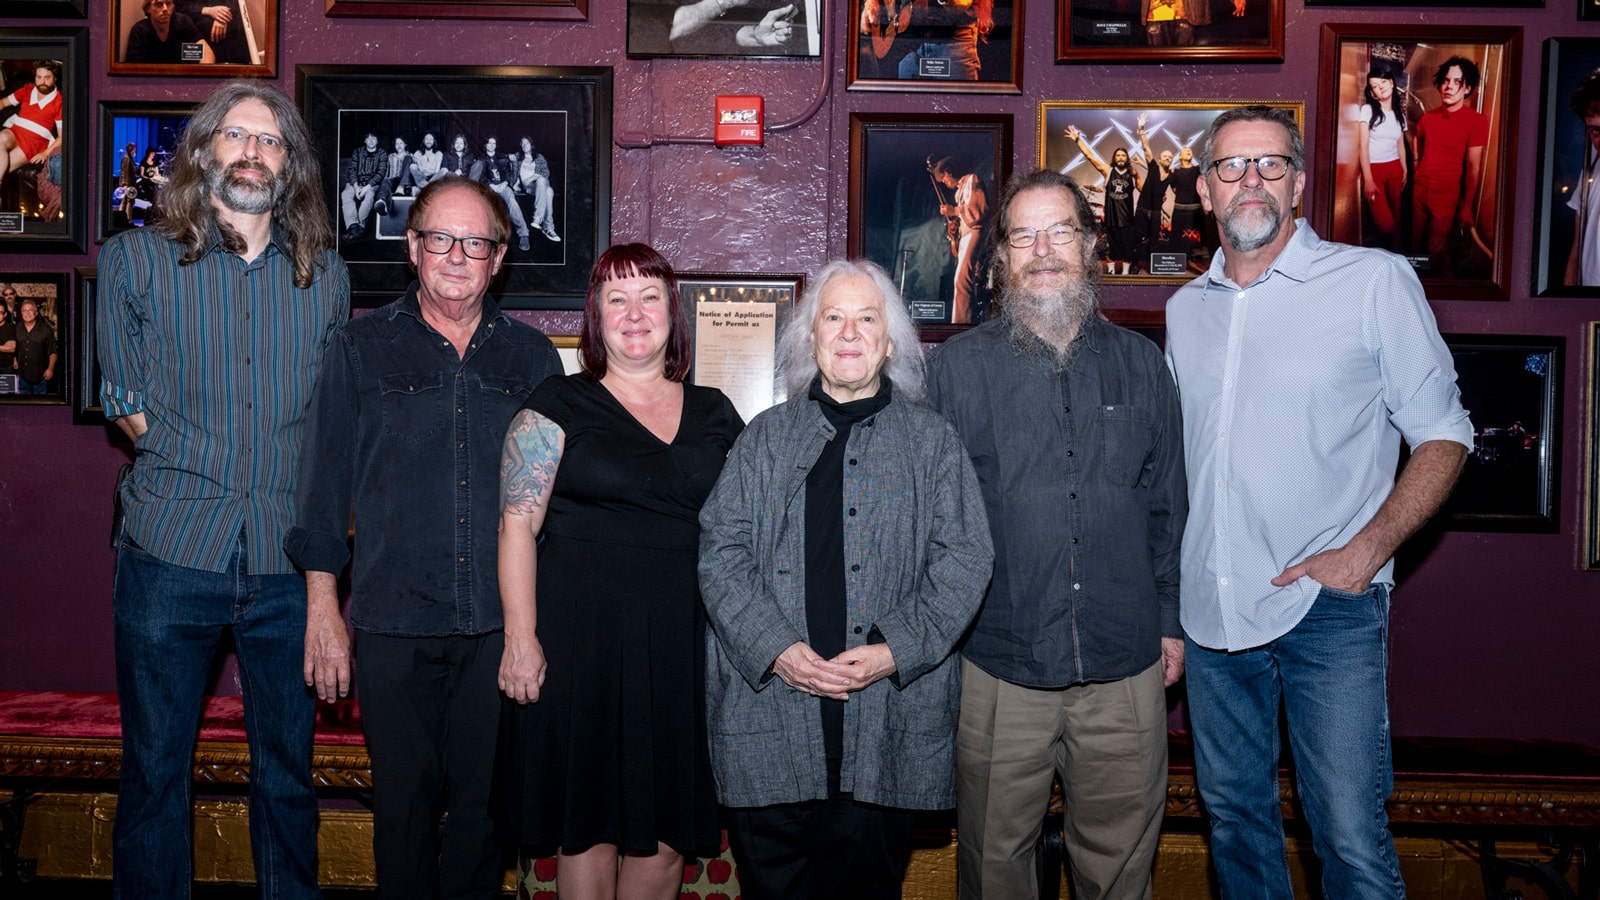 (L-R) Matt Lawsky, Production Manager, The Fillmore; Michael Bailey, Senior Vice President Booking, Live Nation; Amie Bailey-Knobler, General Manager, The Fillmore; Helen Meyer, Executive Vice President, Meyer Sound; John Meyer, President & CEO, Meyer Sound;
Derek Featherstone, CEO, UltraSound, LLC